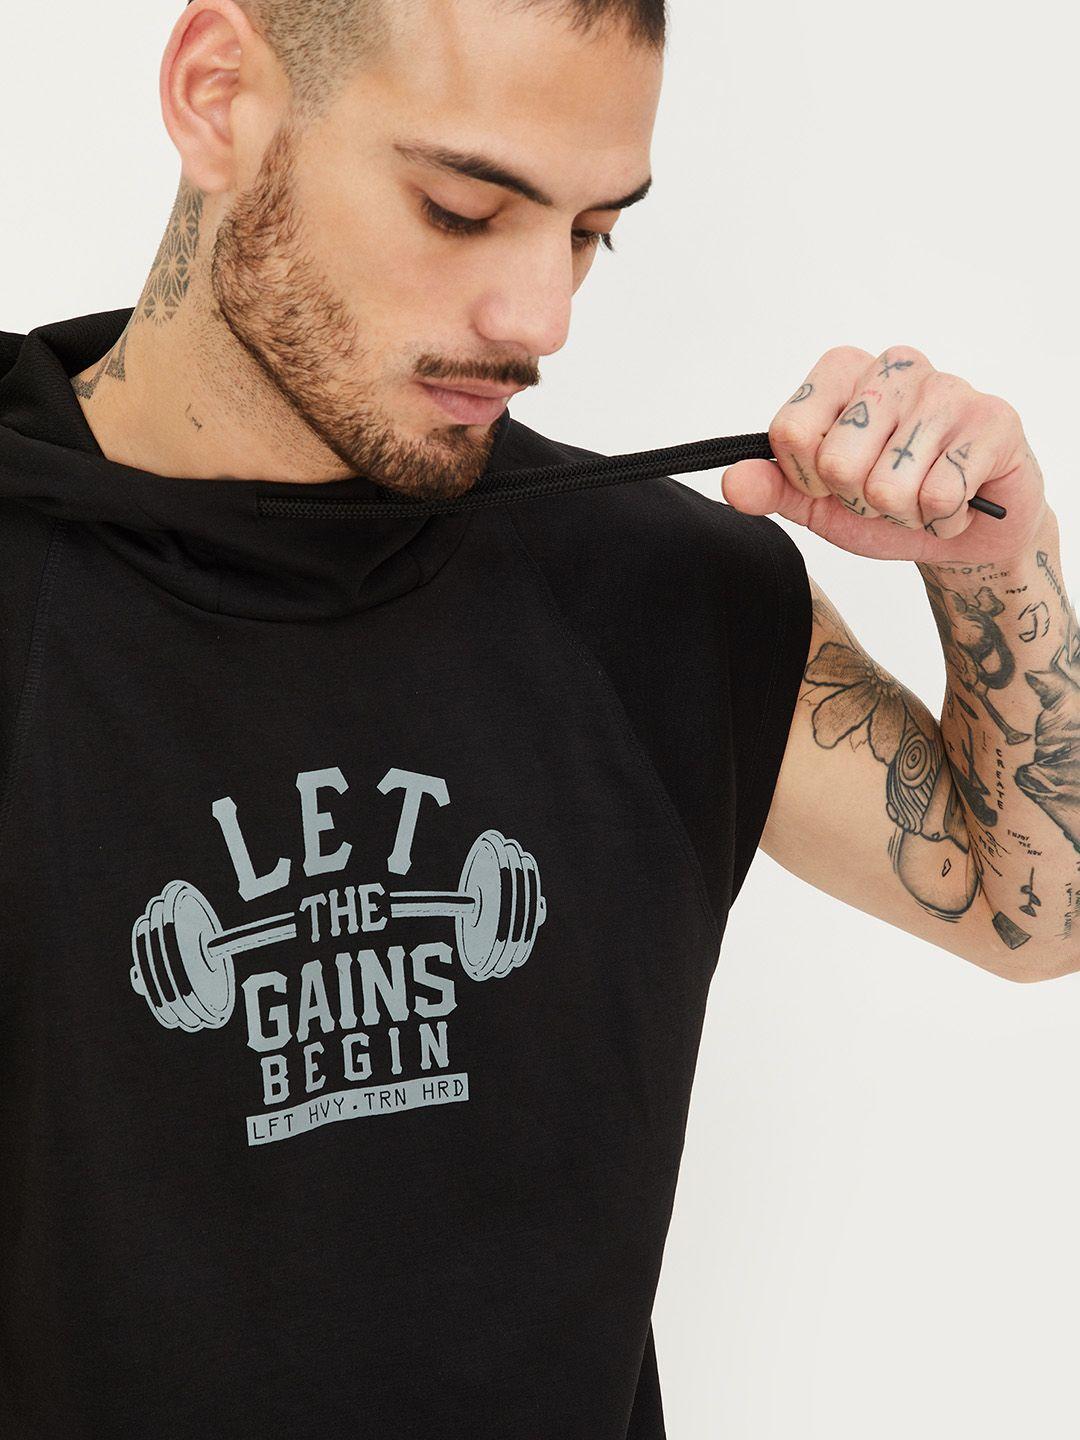 max-typography-printed-sleeveless-hooded-t-shirt